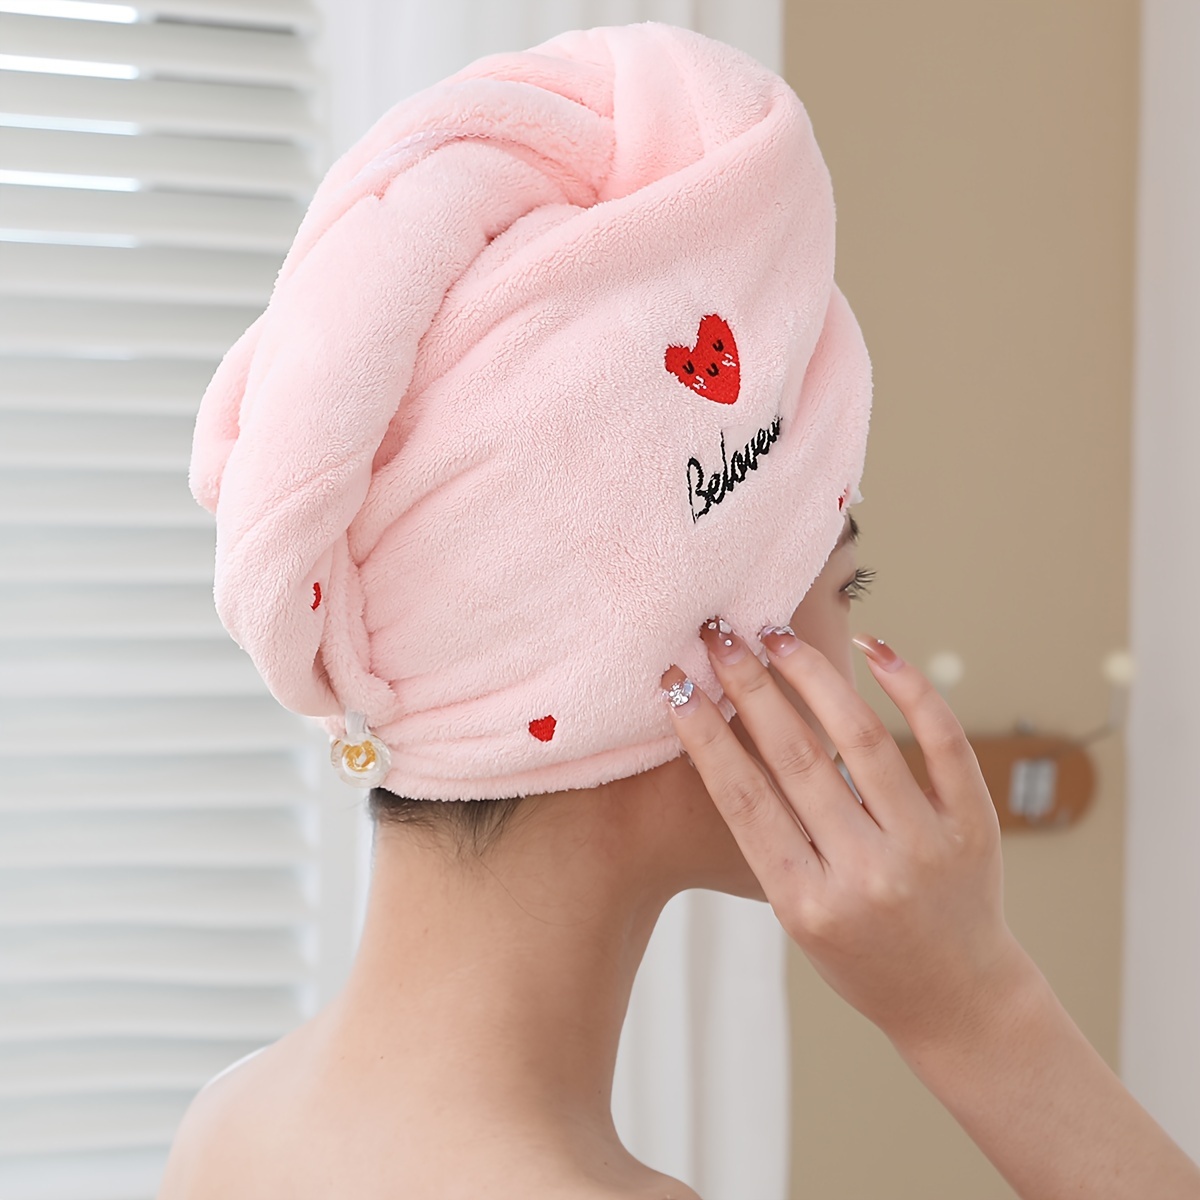 

1pc Heart Embroidered Hair Wrap Towel, Absorbent & Quick-drying Lady's Turban, Super Soft Dry Hair Cap, For Long & Short Hair, Ideal Bathroom Supplies